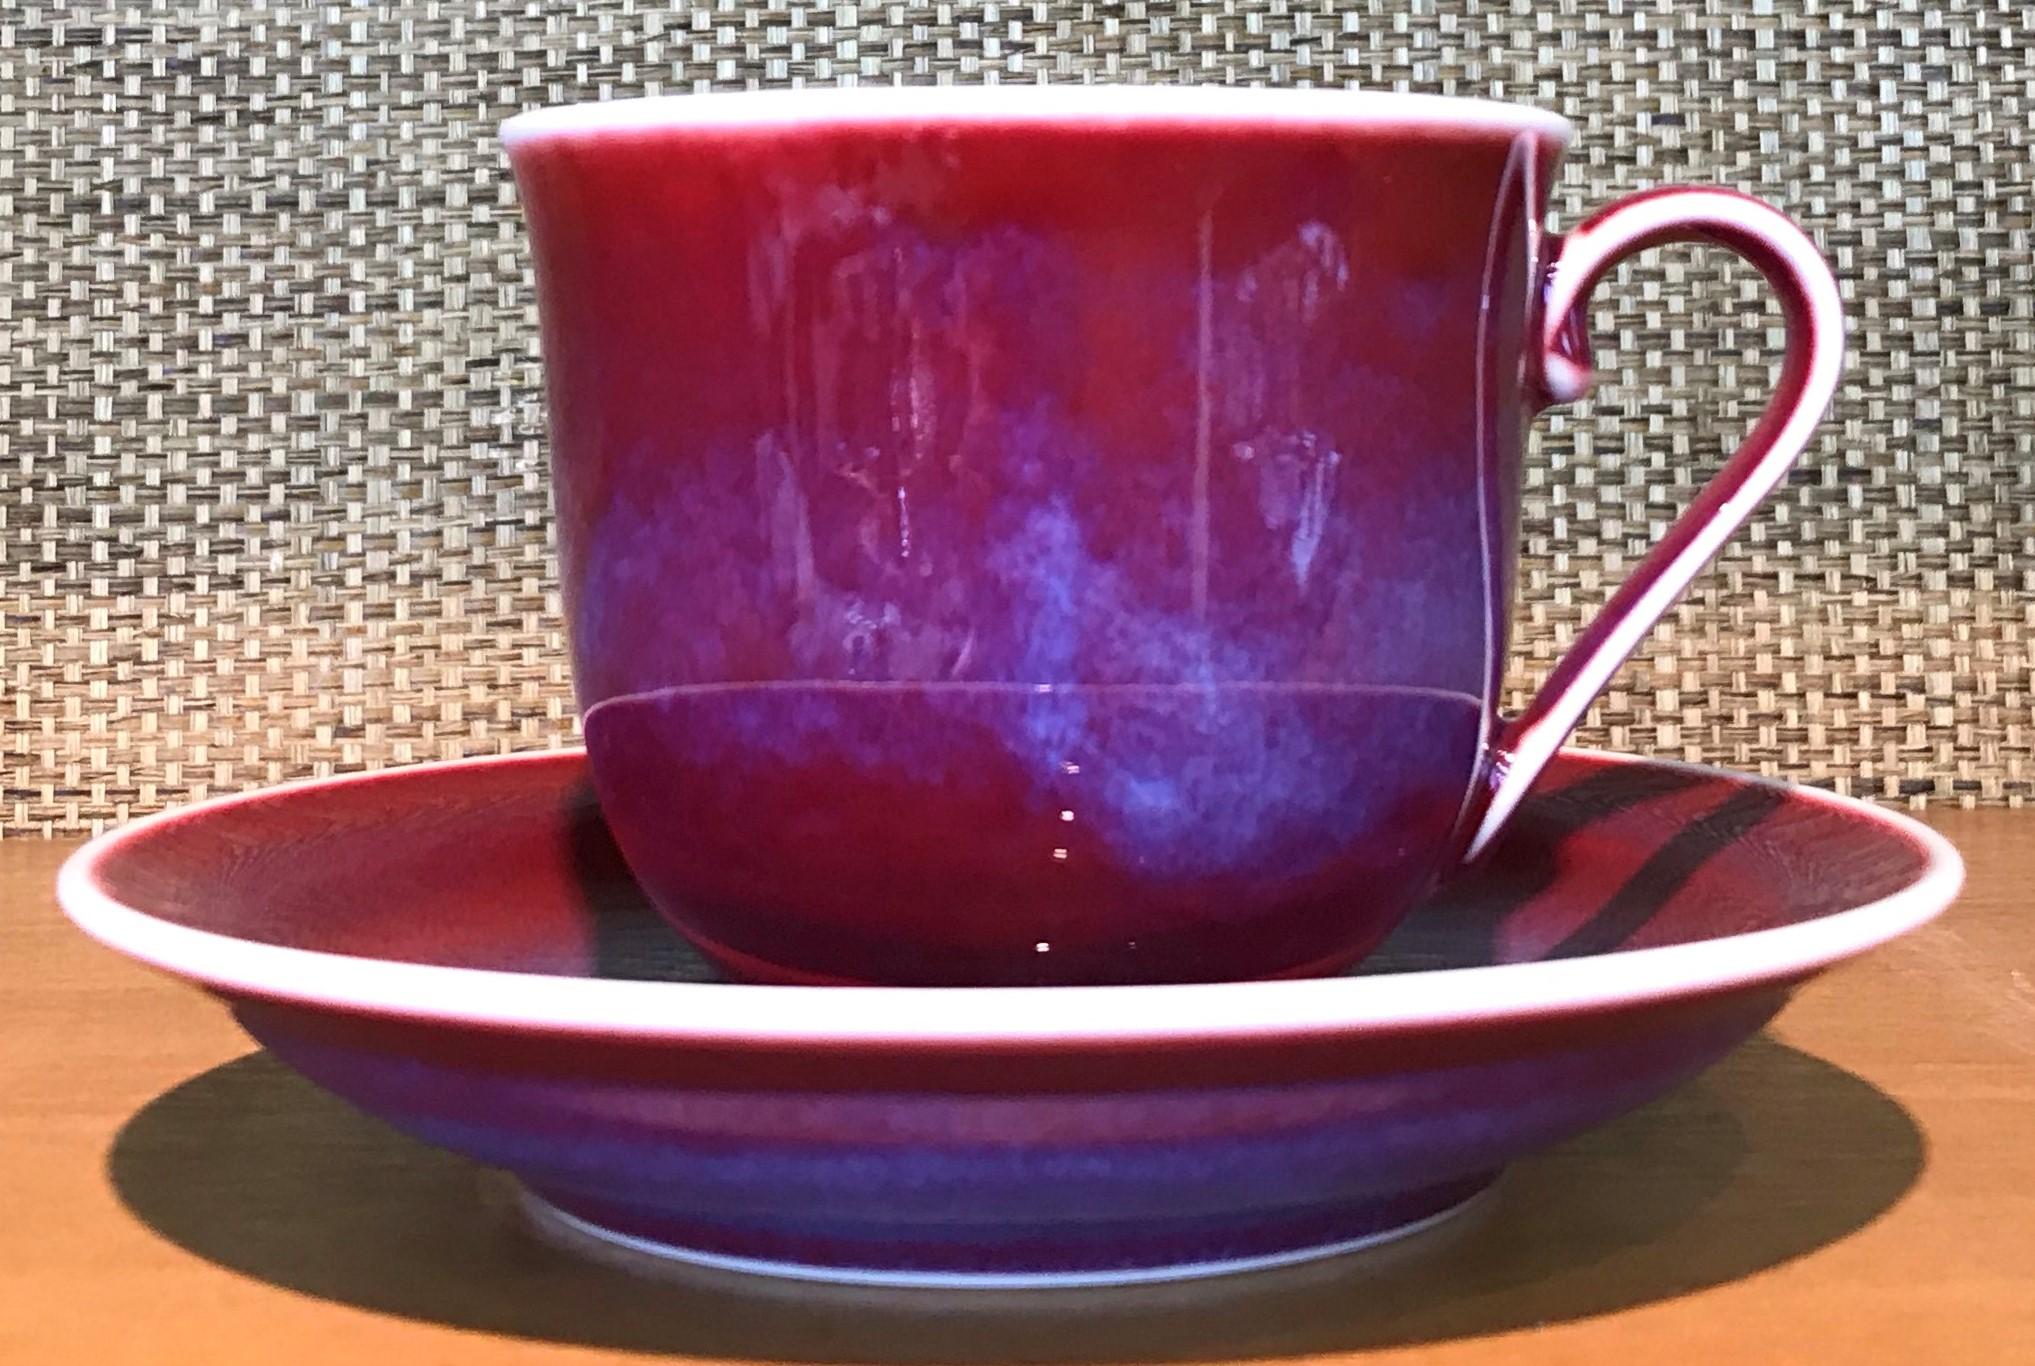 Exceptional Japanese contemporary porcelain cup and saucer, hand-glazed in a stunning signature red with blue clouds on a beautifully shaped body. This is a signed work by a highly acclaimed award-winning master porcelain artist from the Imari-Arita